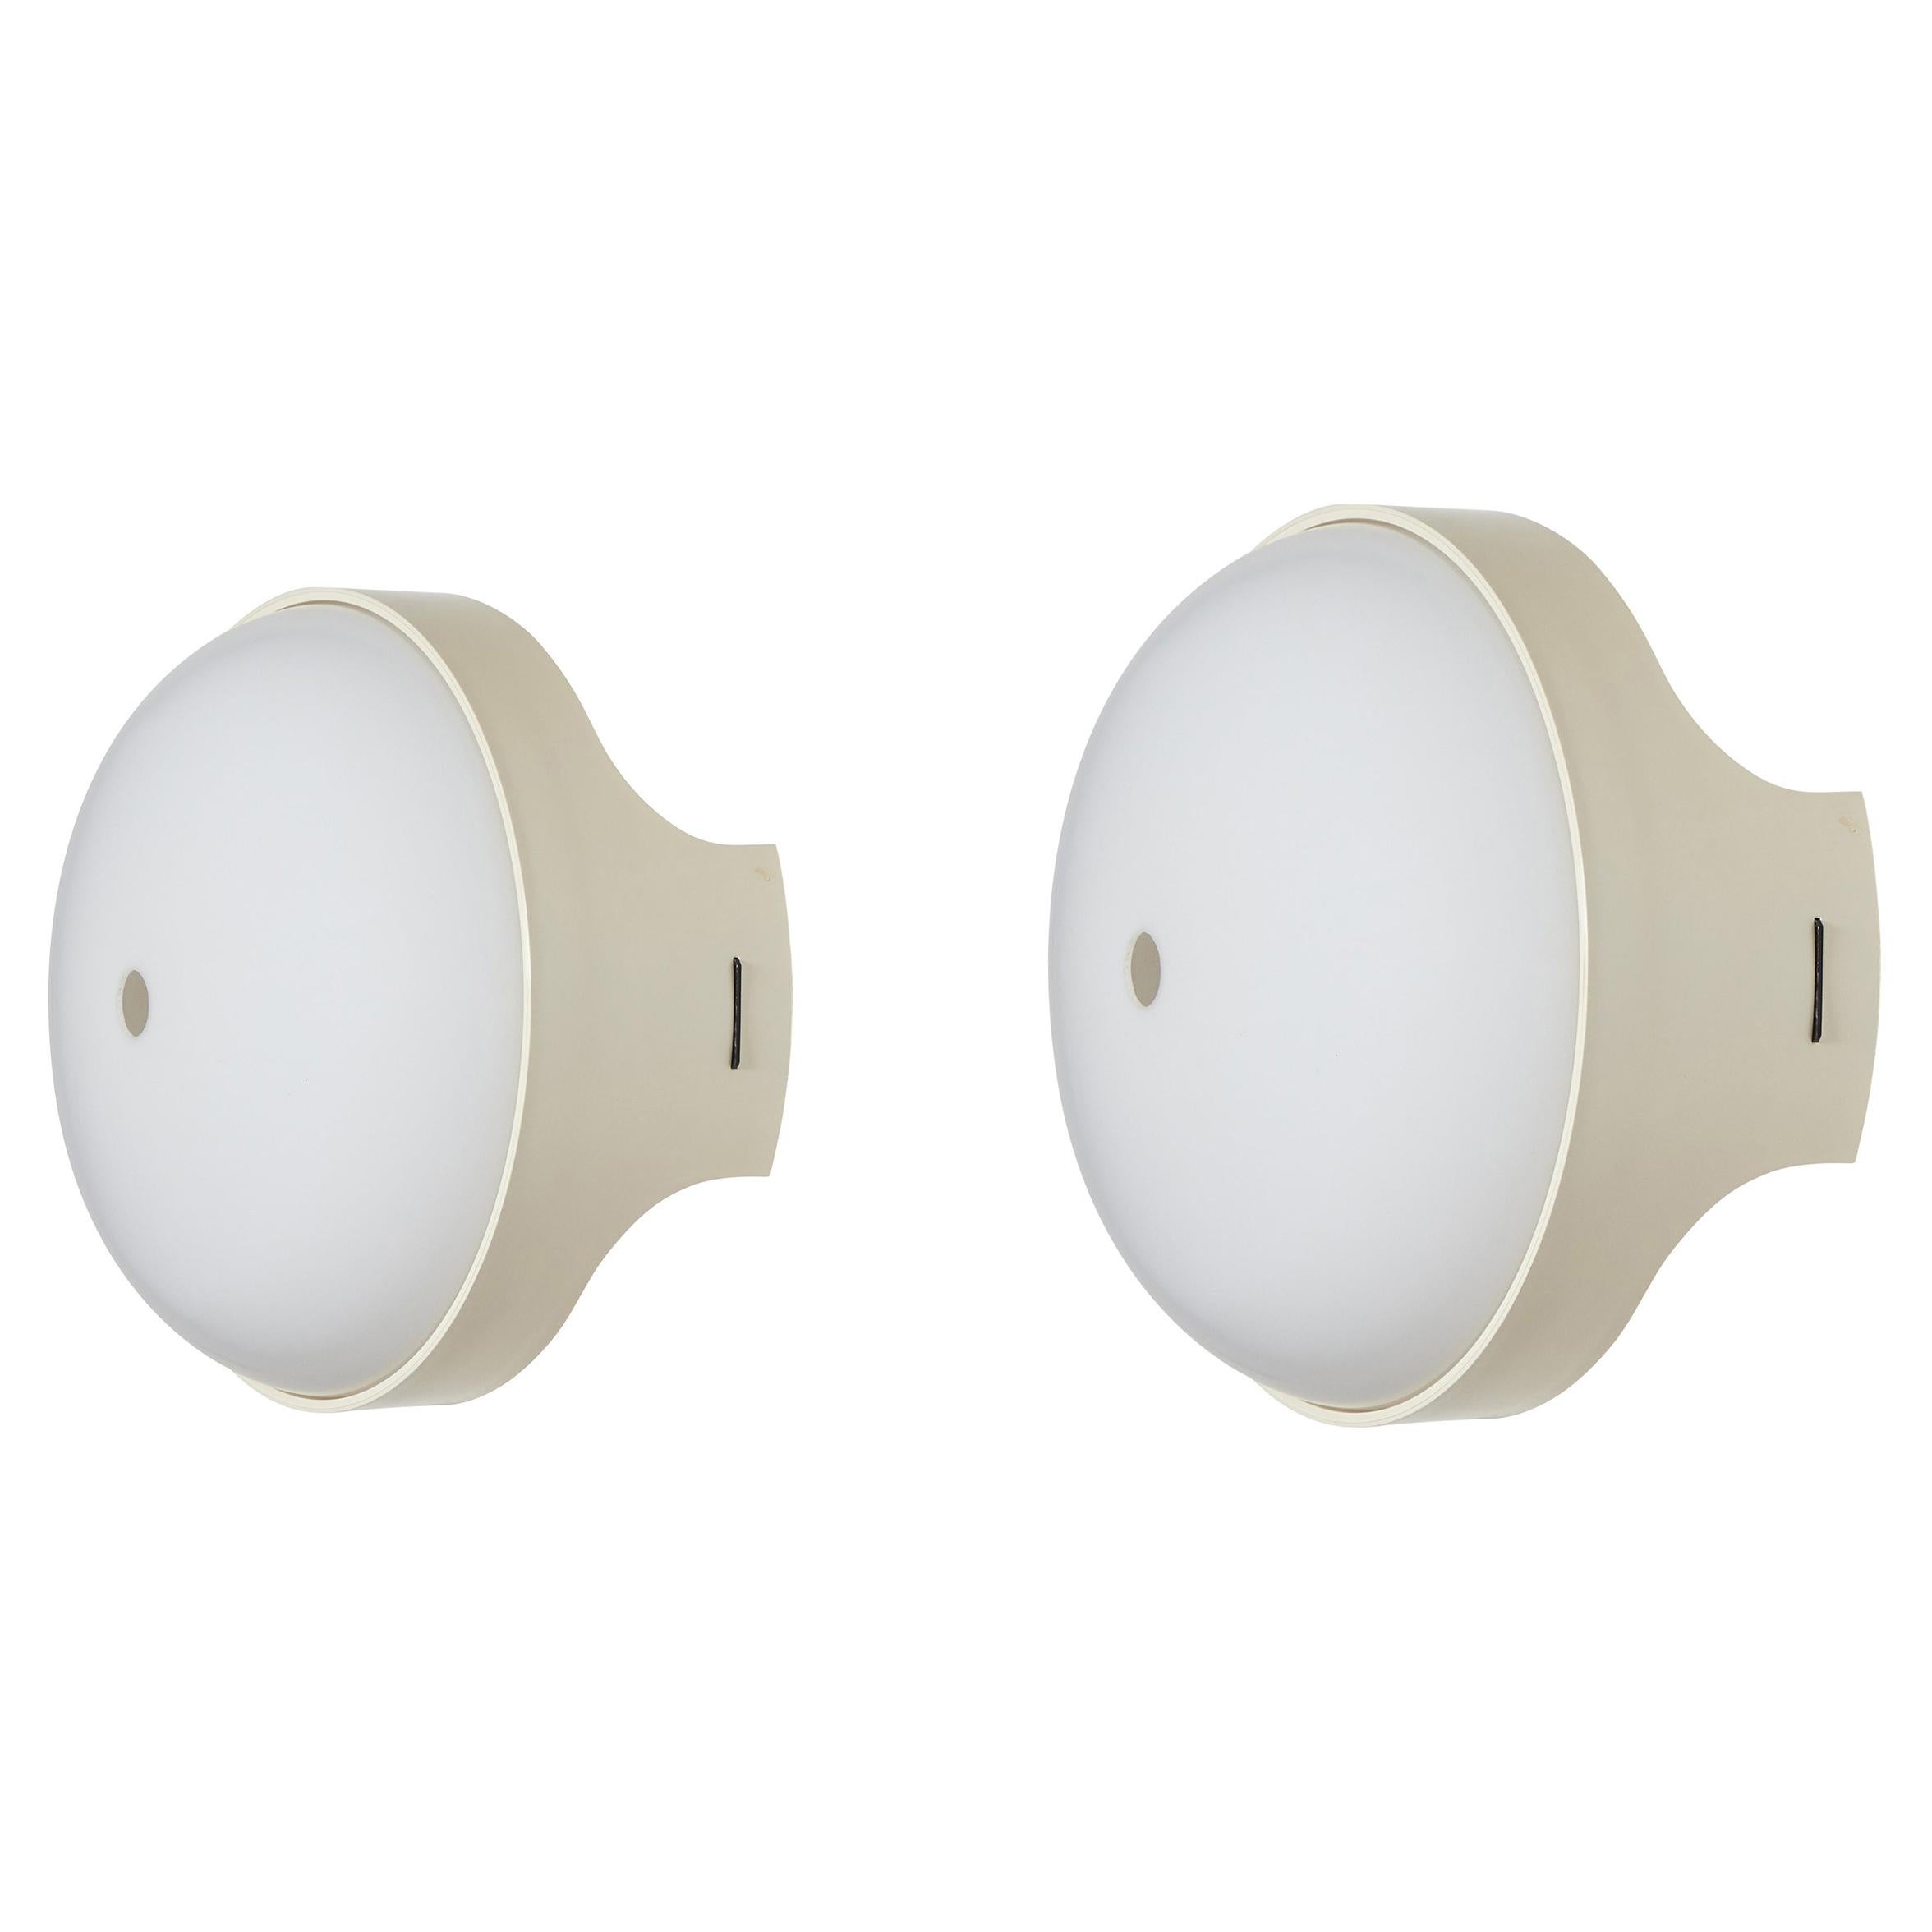 Pair of 4332 Wall/Ceiling Lights by Gian Emilio, Piero & Anna Monti for Kartell